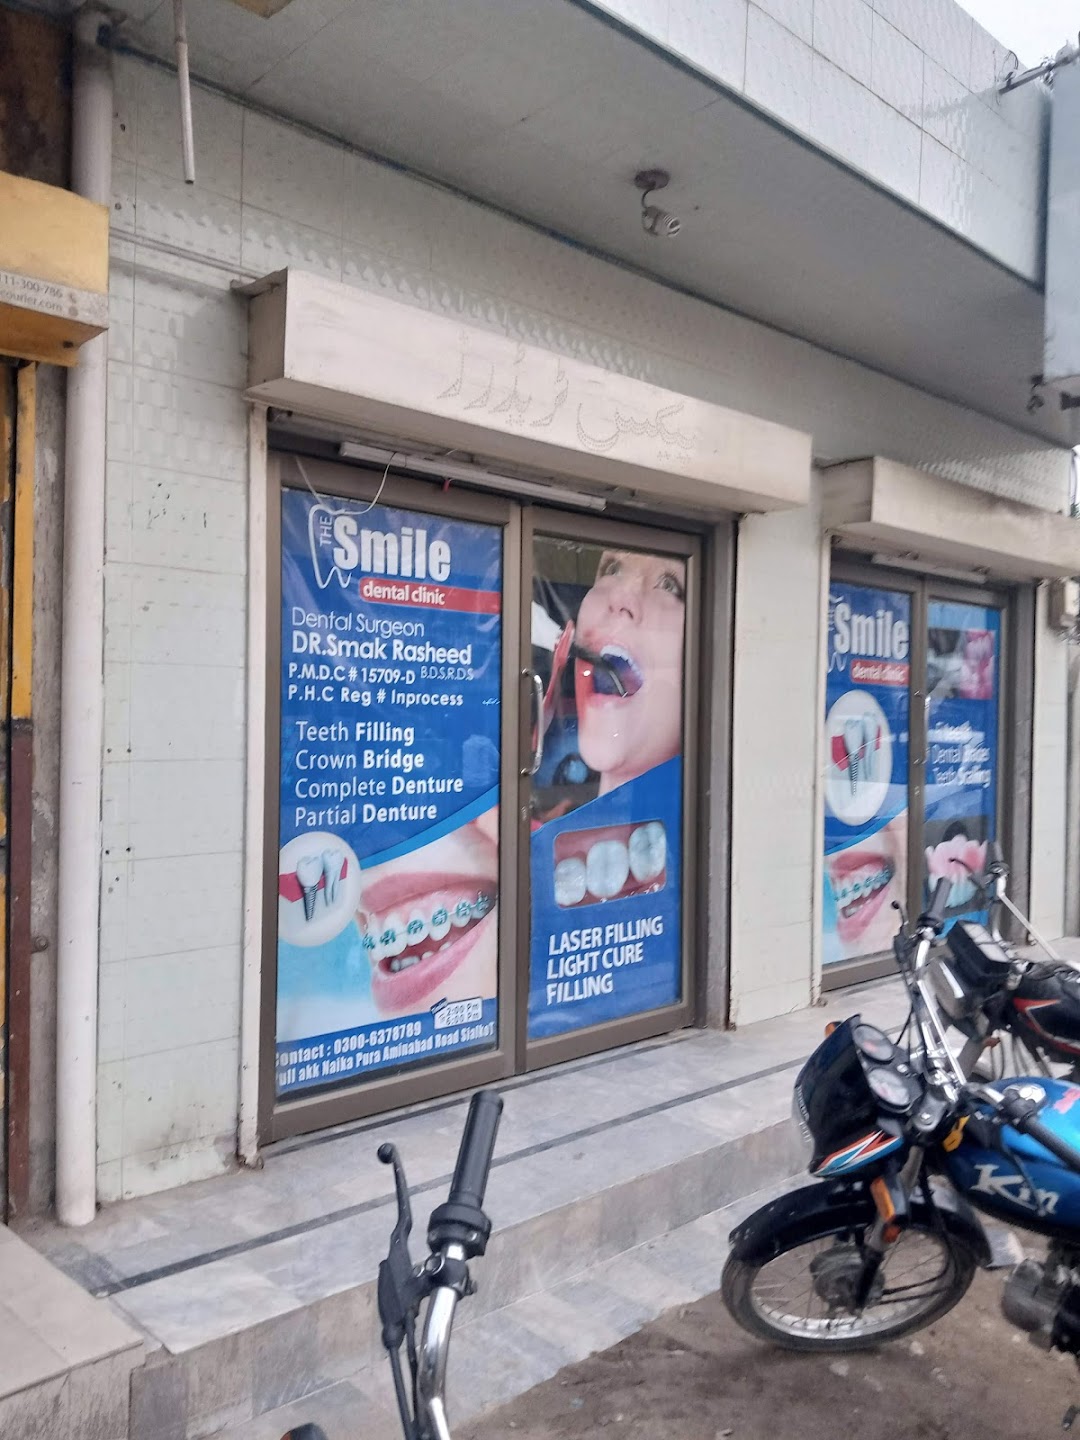 The Smile Dental Clinic